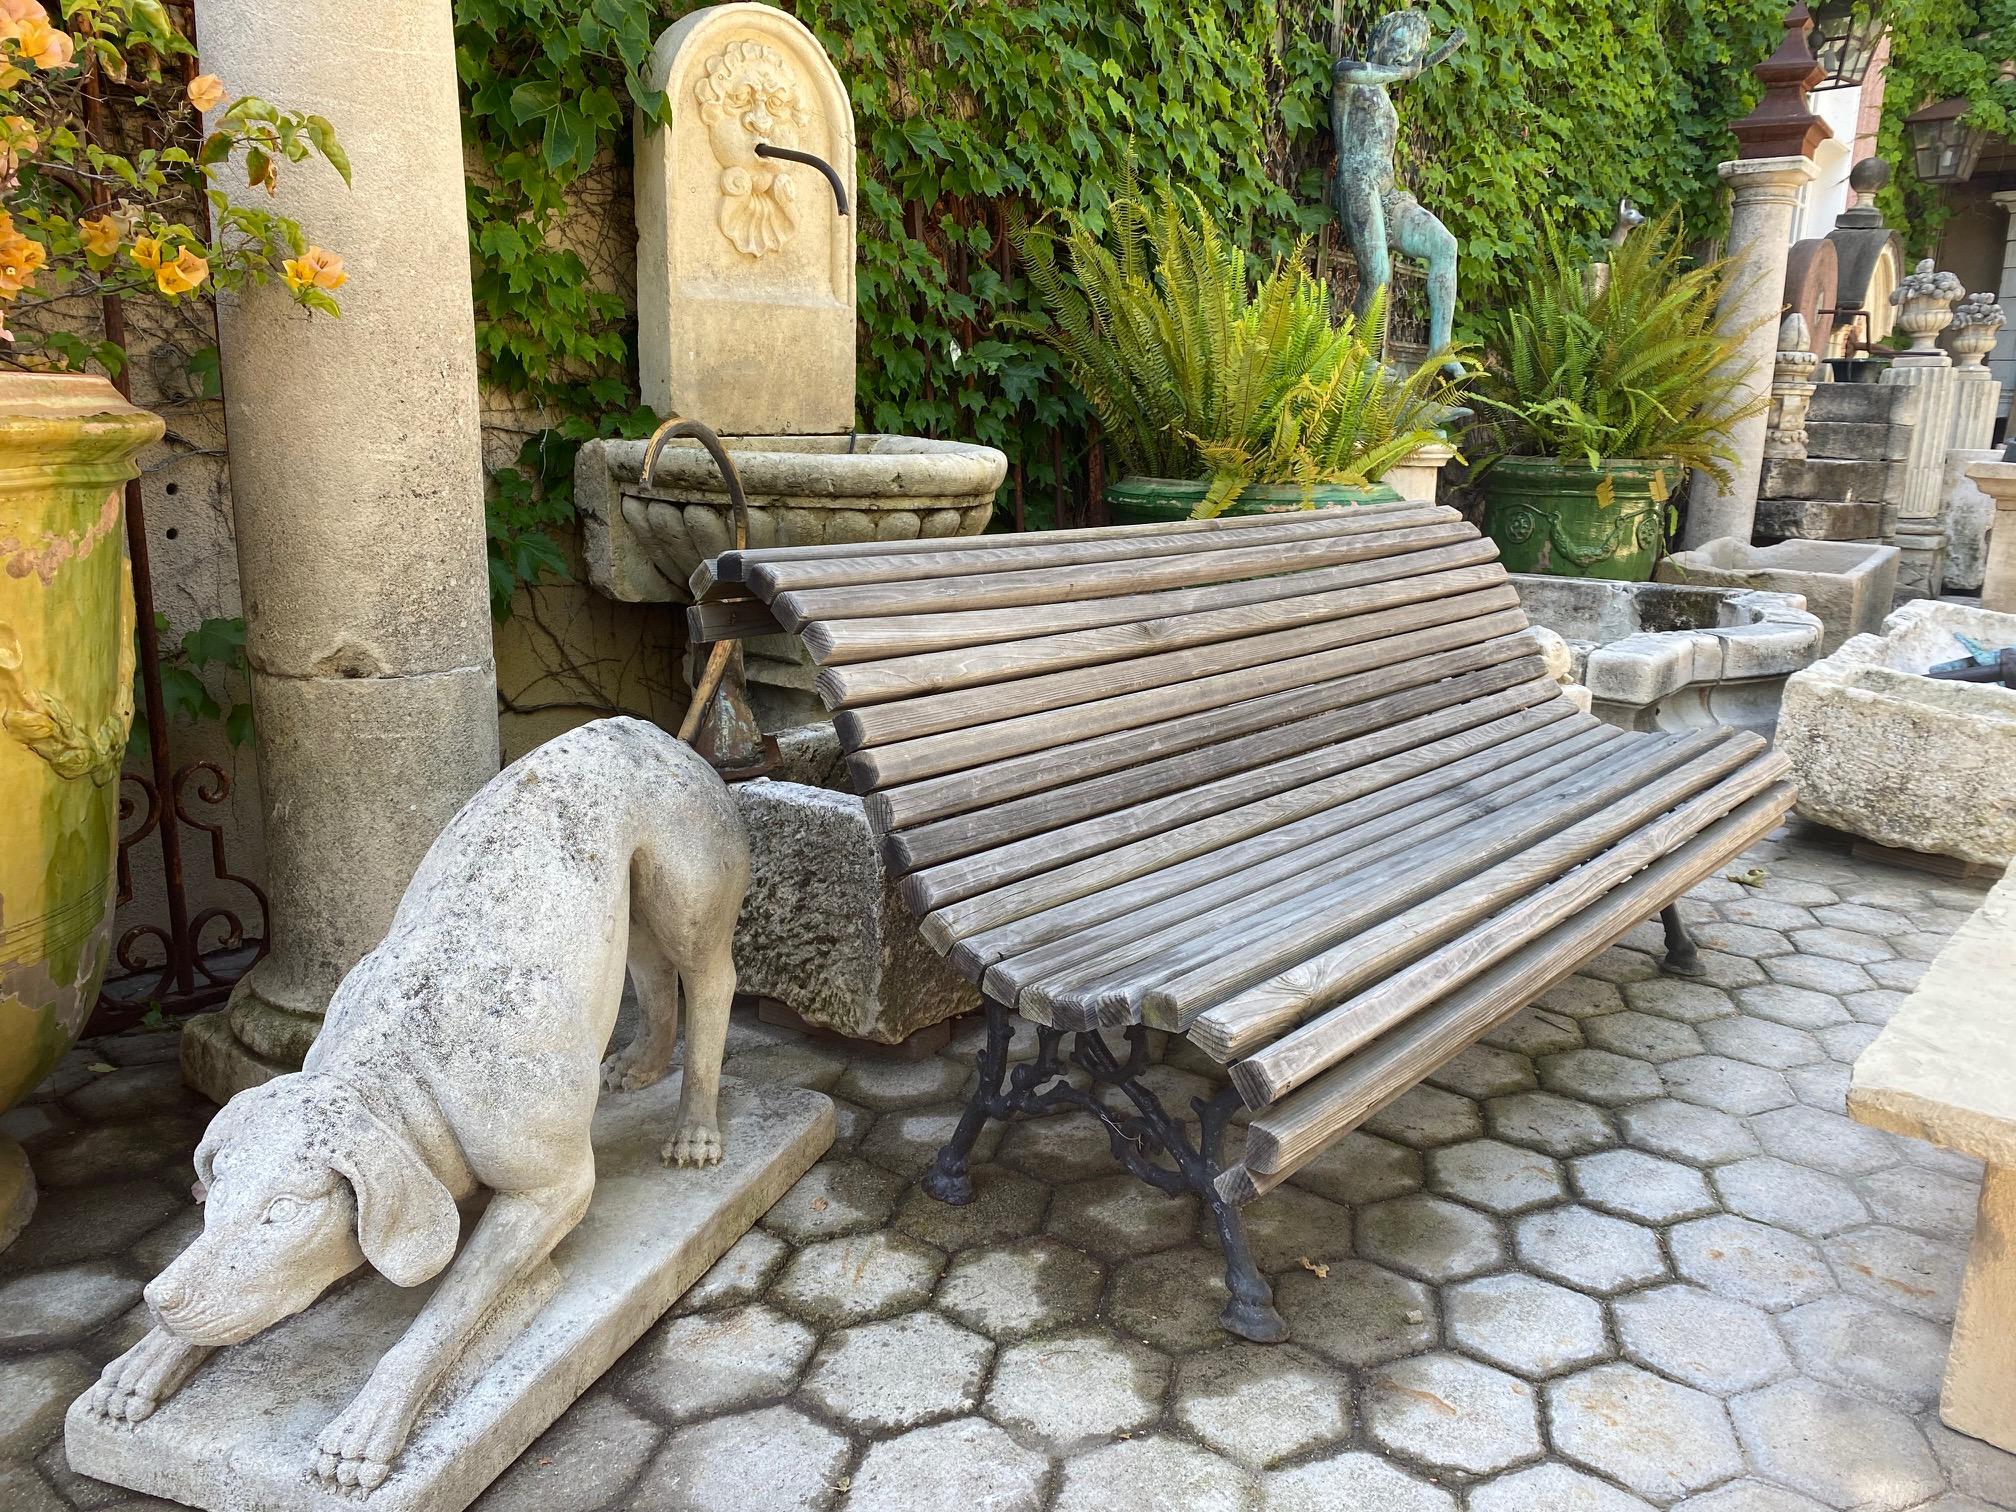 19th century hand forged metal and redwood Slats Garden bench. This rustic beauty is a rare piece indeed A beautiful garden bench simple lines that works in an interior as a seating or decorative architectural focal point element. Placed in the